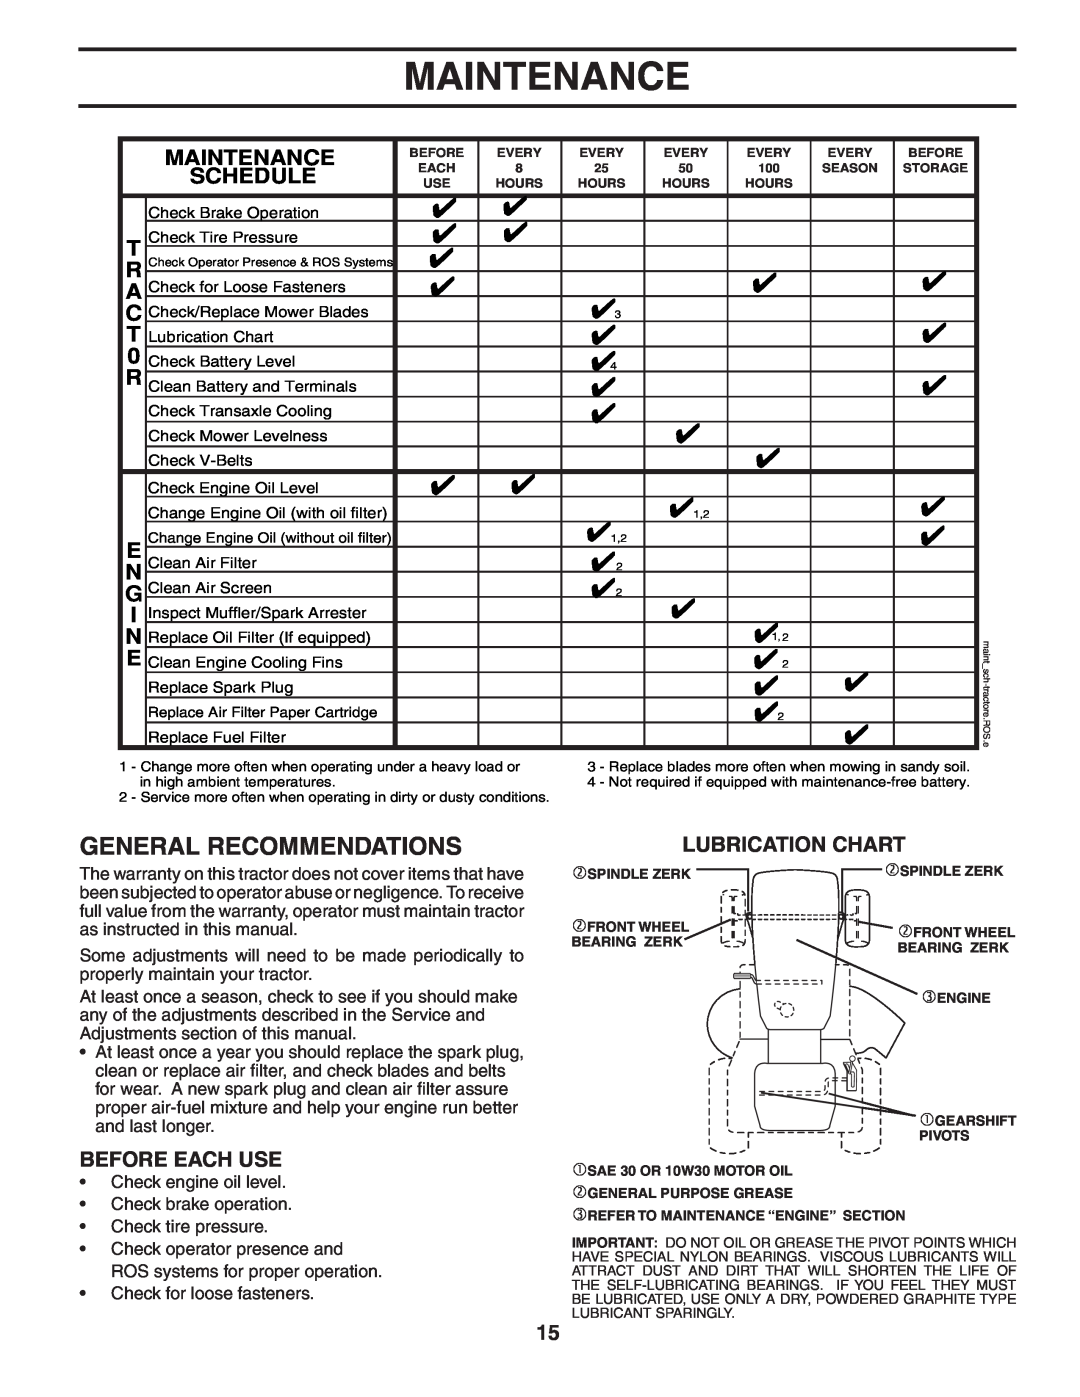 Poulan 403315 manual Maintenance, General Recommendations, Schedule, Before Each Use, Lubrication Chart 